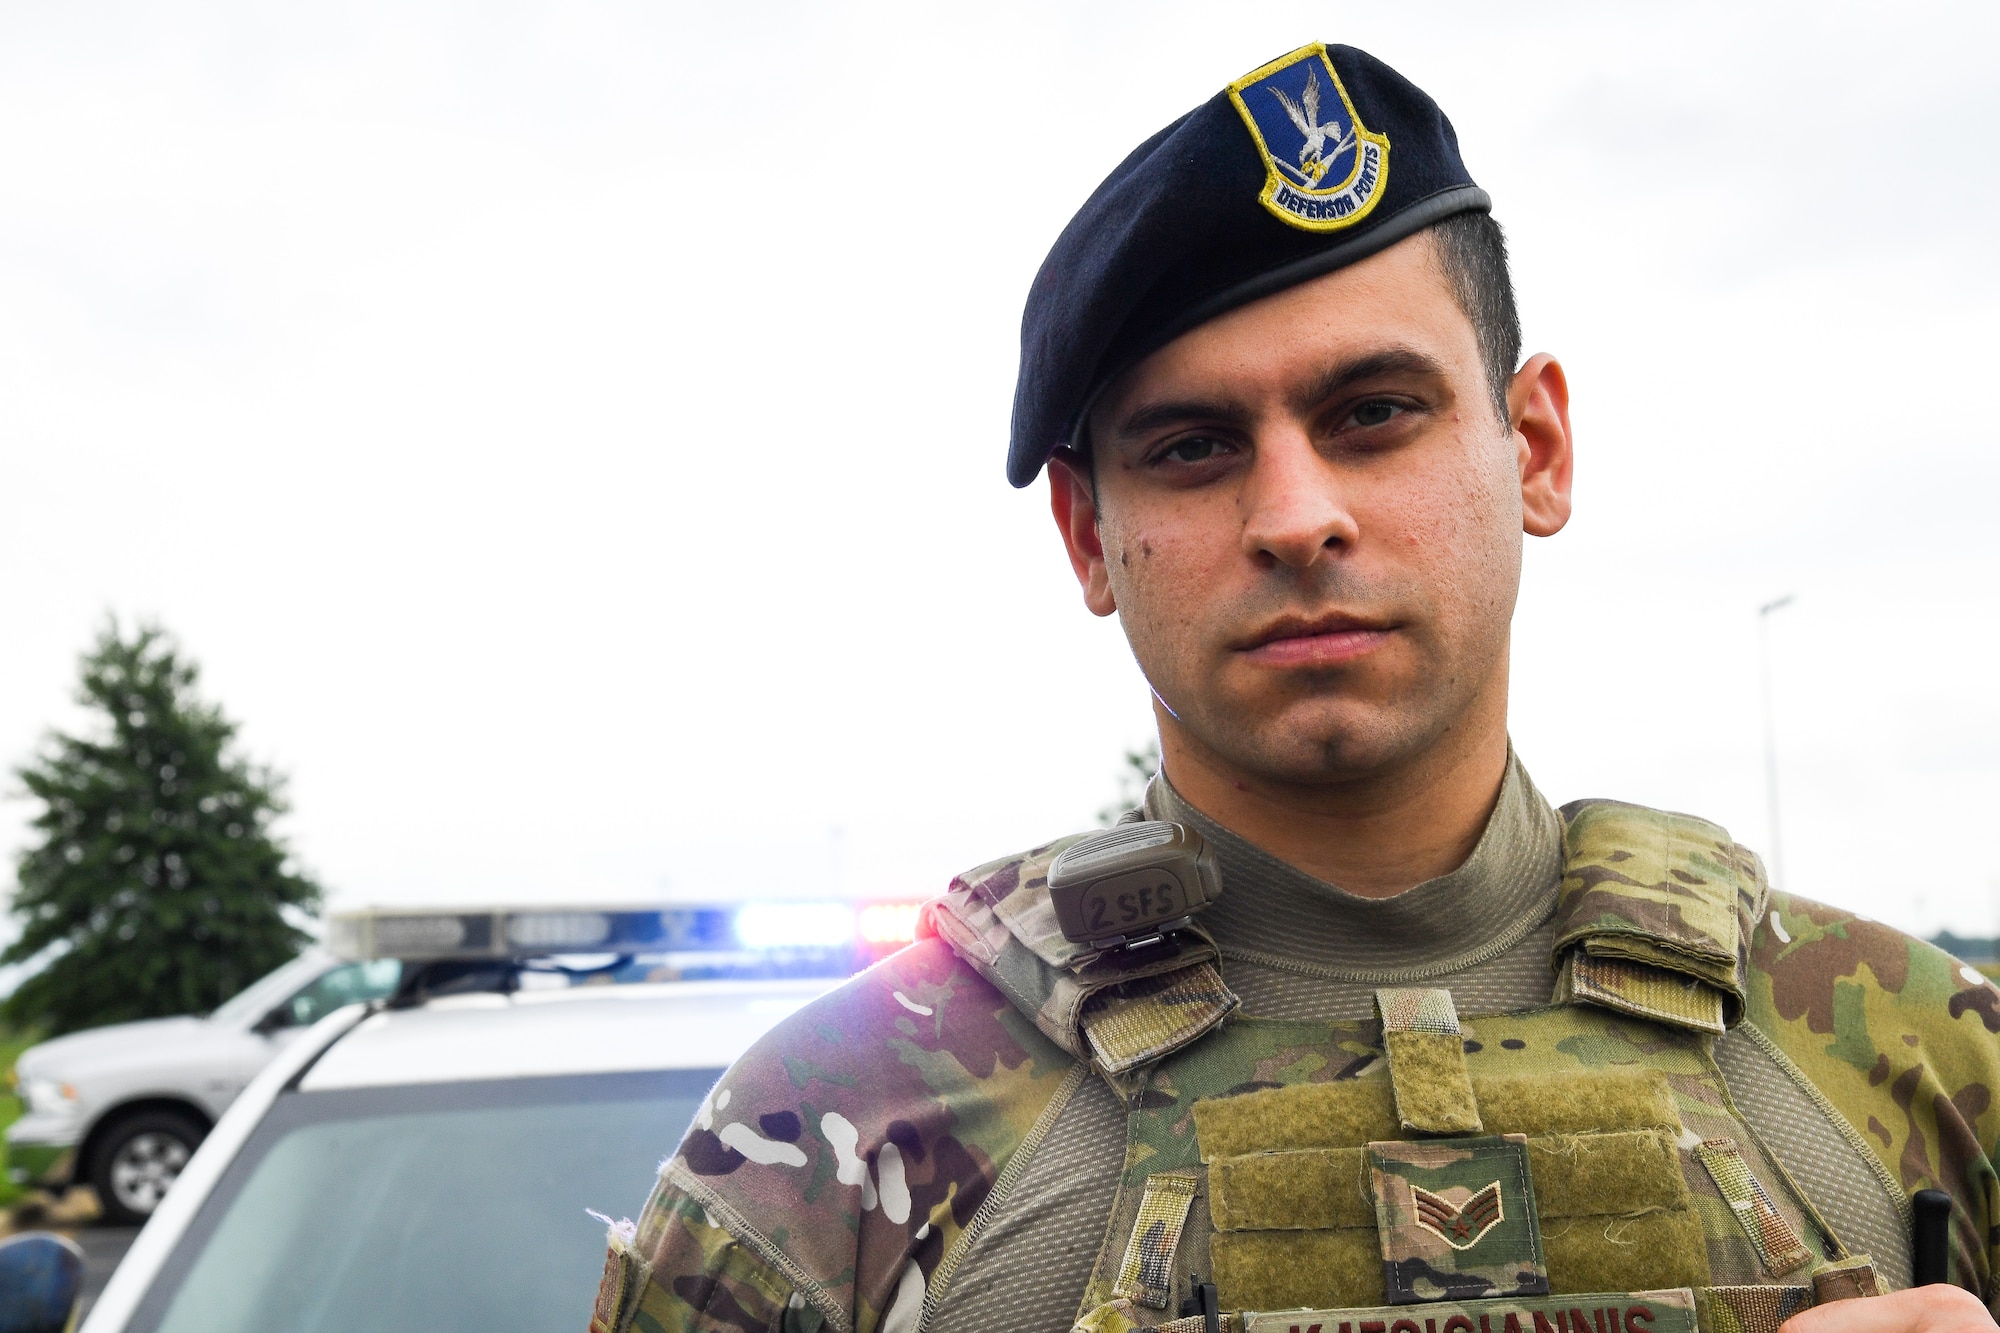 To Serve and Protect: From Greek soldier to U.S. Airman